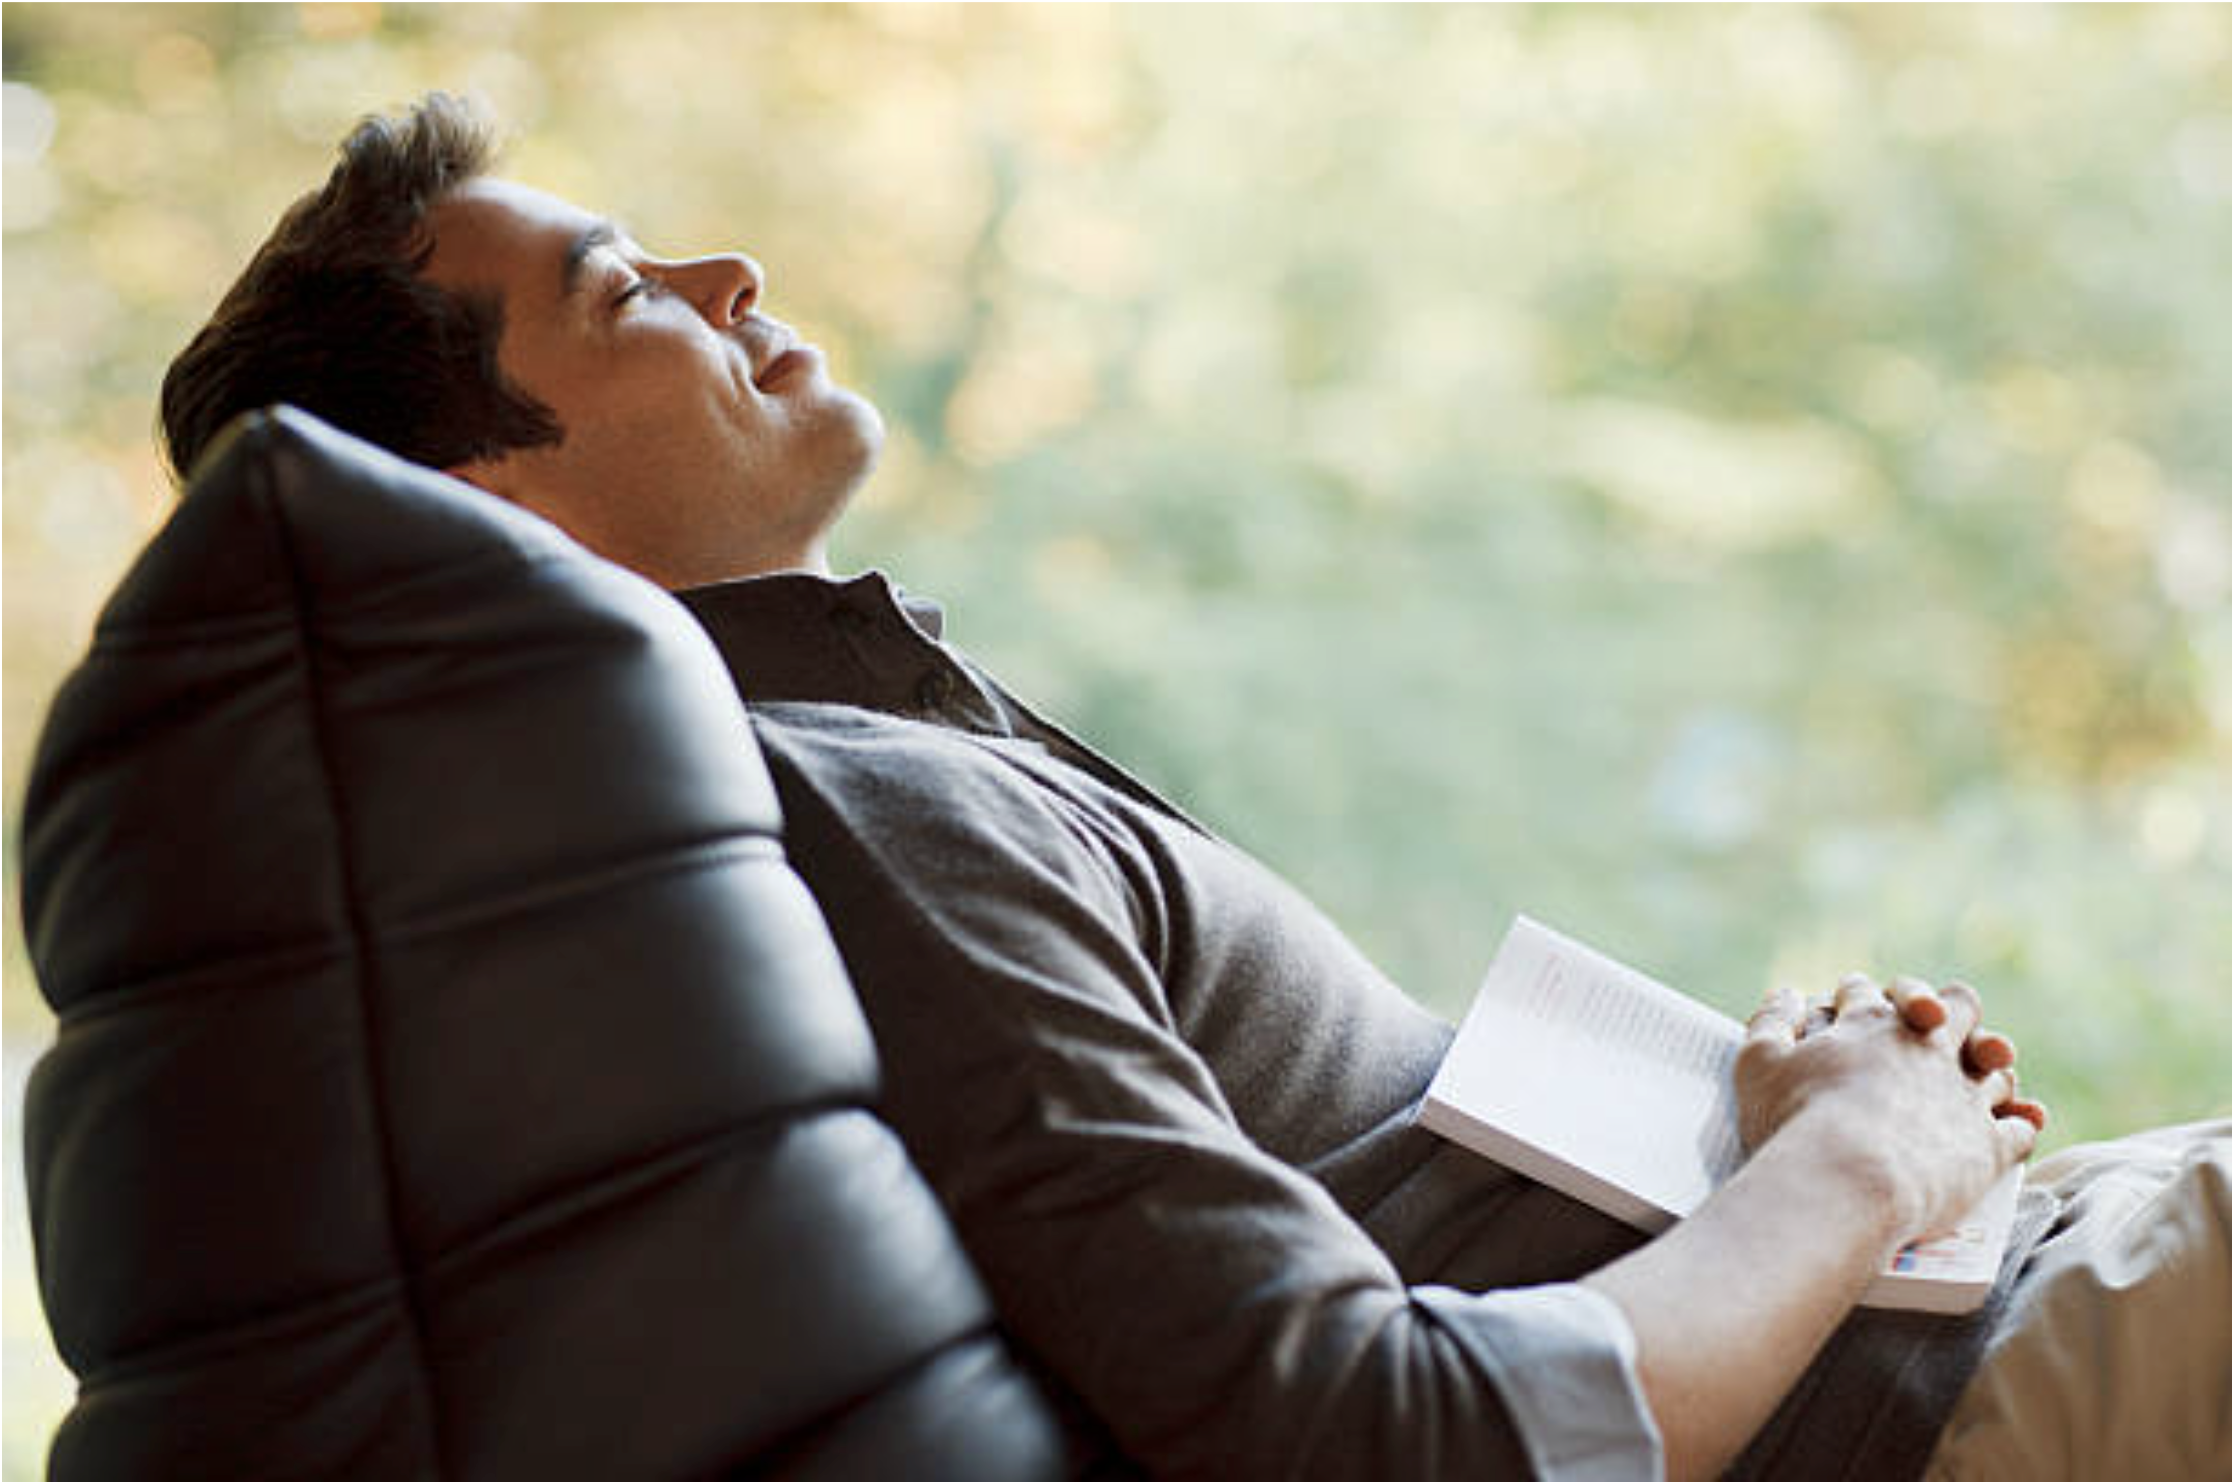 A man sitting back in a chair taking a break from reading a book to pause and breath and enjoy the time he has made for himself to do something that is relaxing.